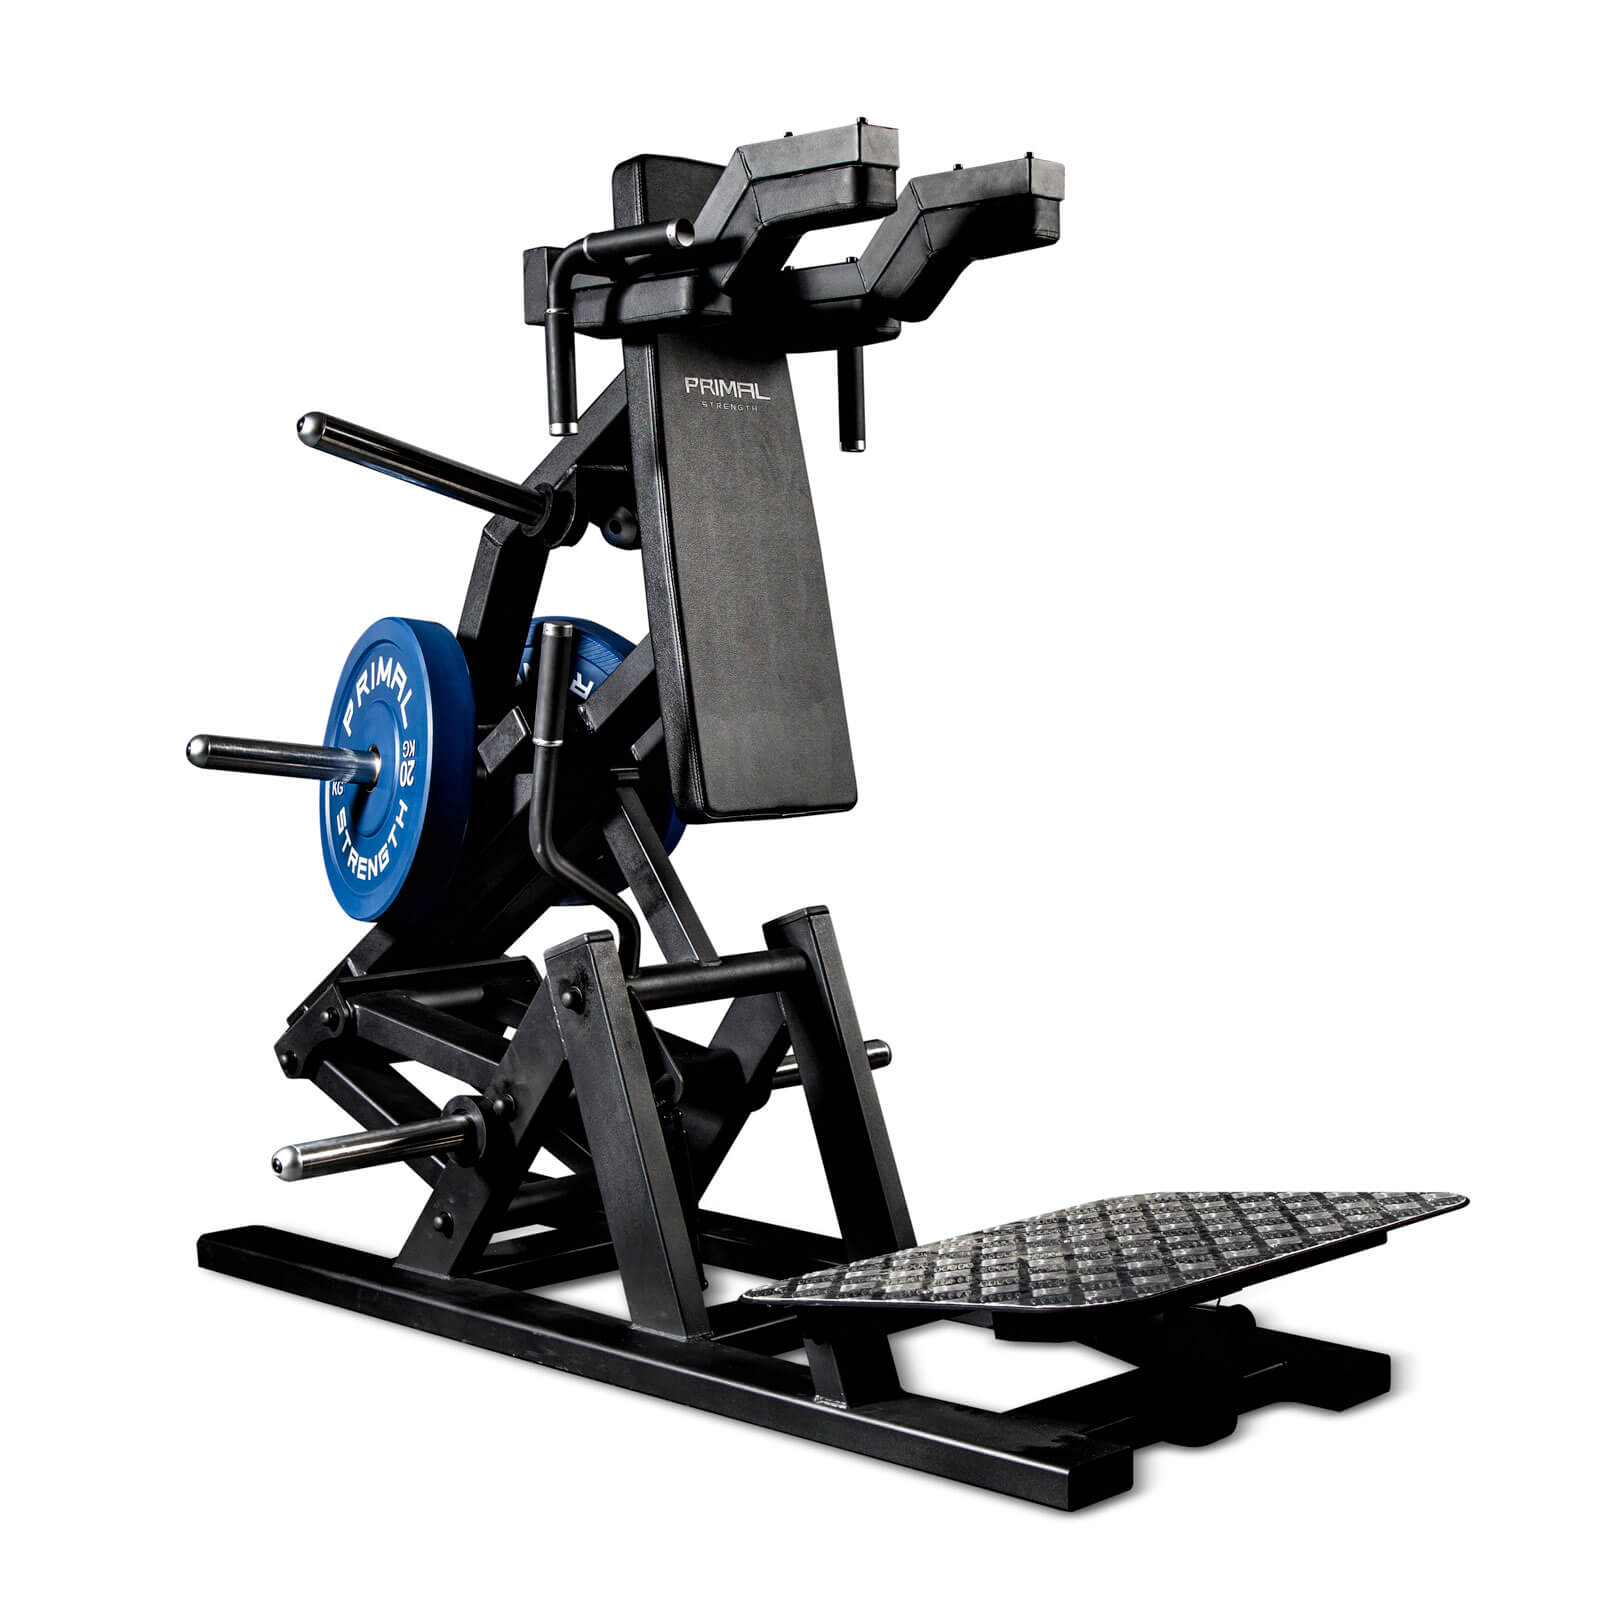 a plate loaded hack squat gym machine loaded with a pair of weight plates